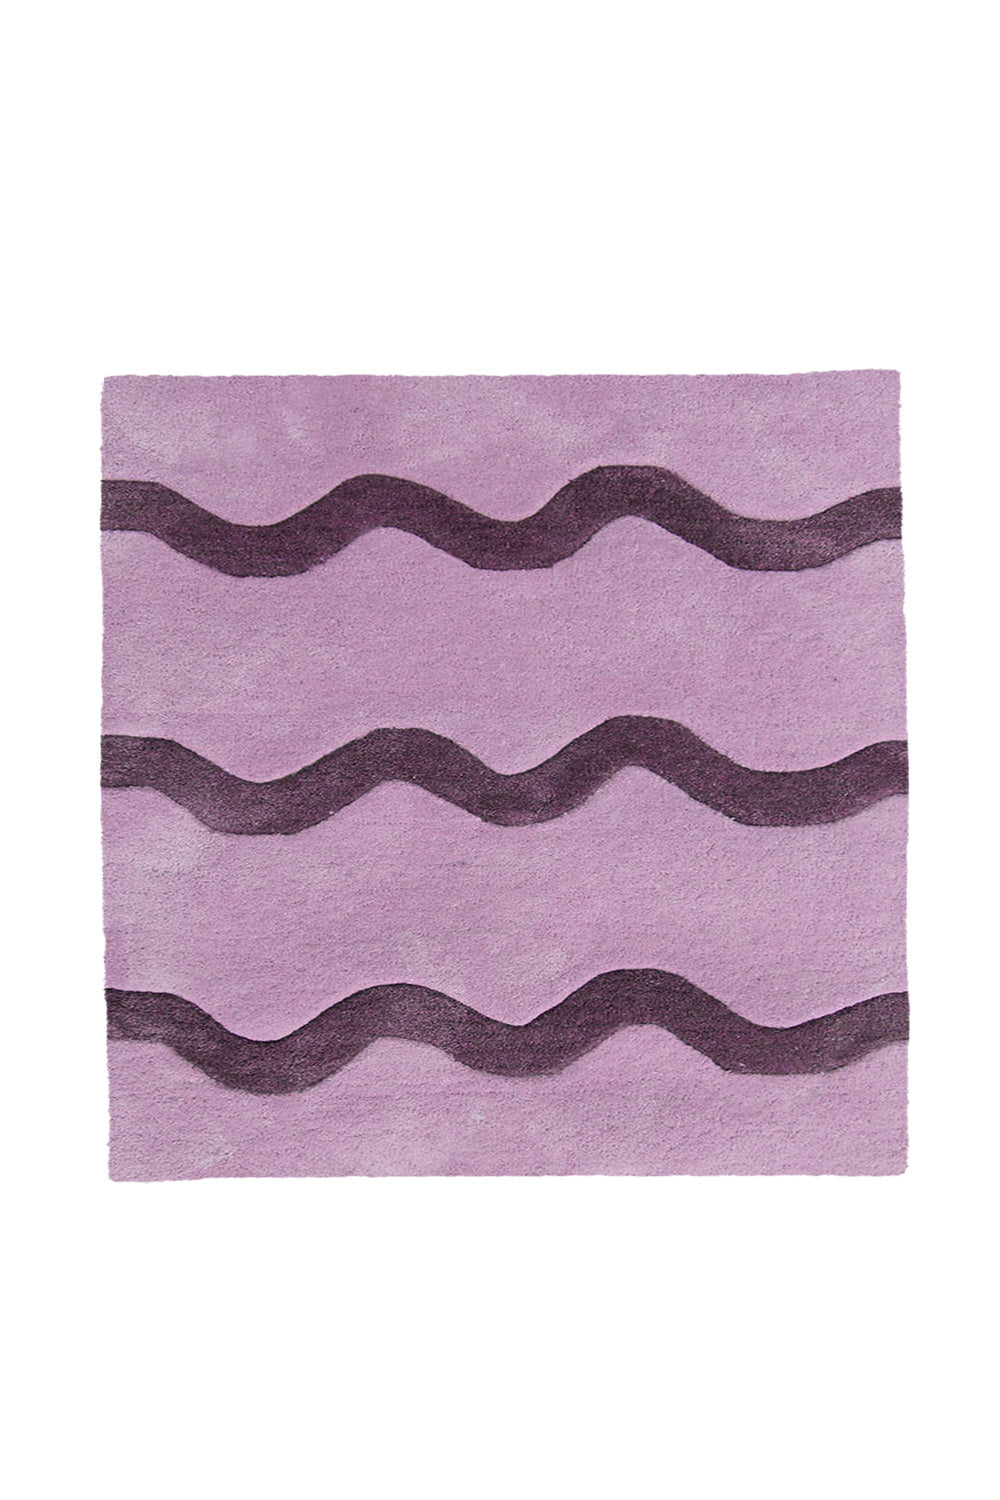 Squiggly Square Hand Tufted Wool Rug in Purple by Jubi